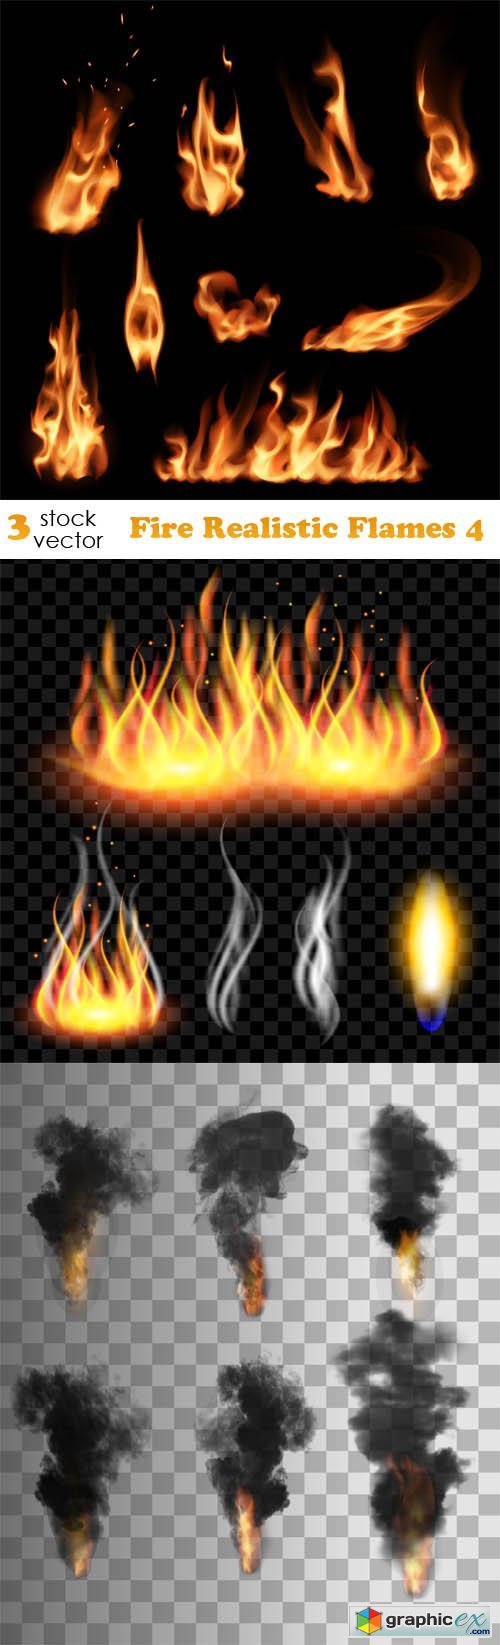 Fire Realistic Flames 4